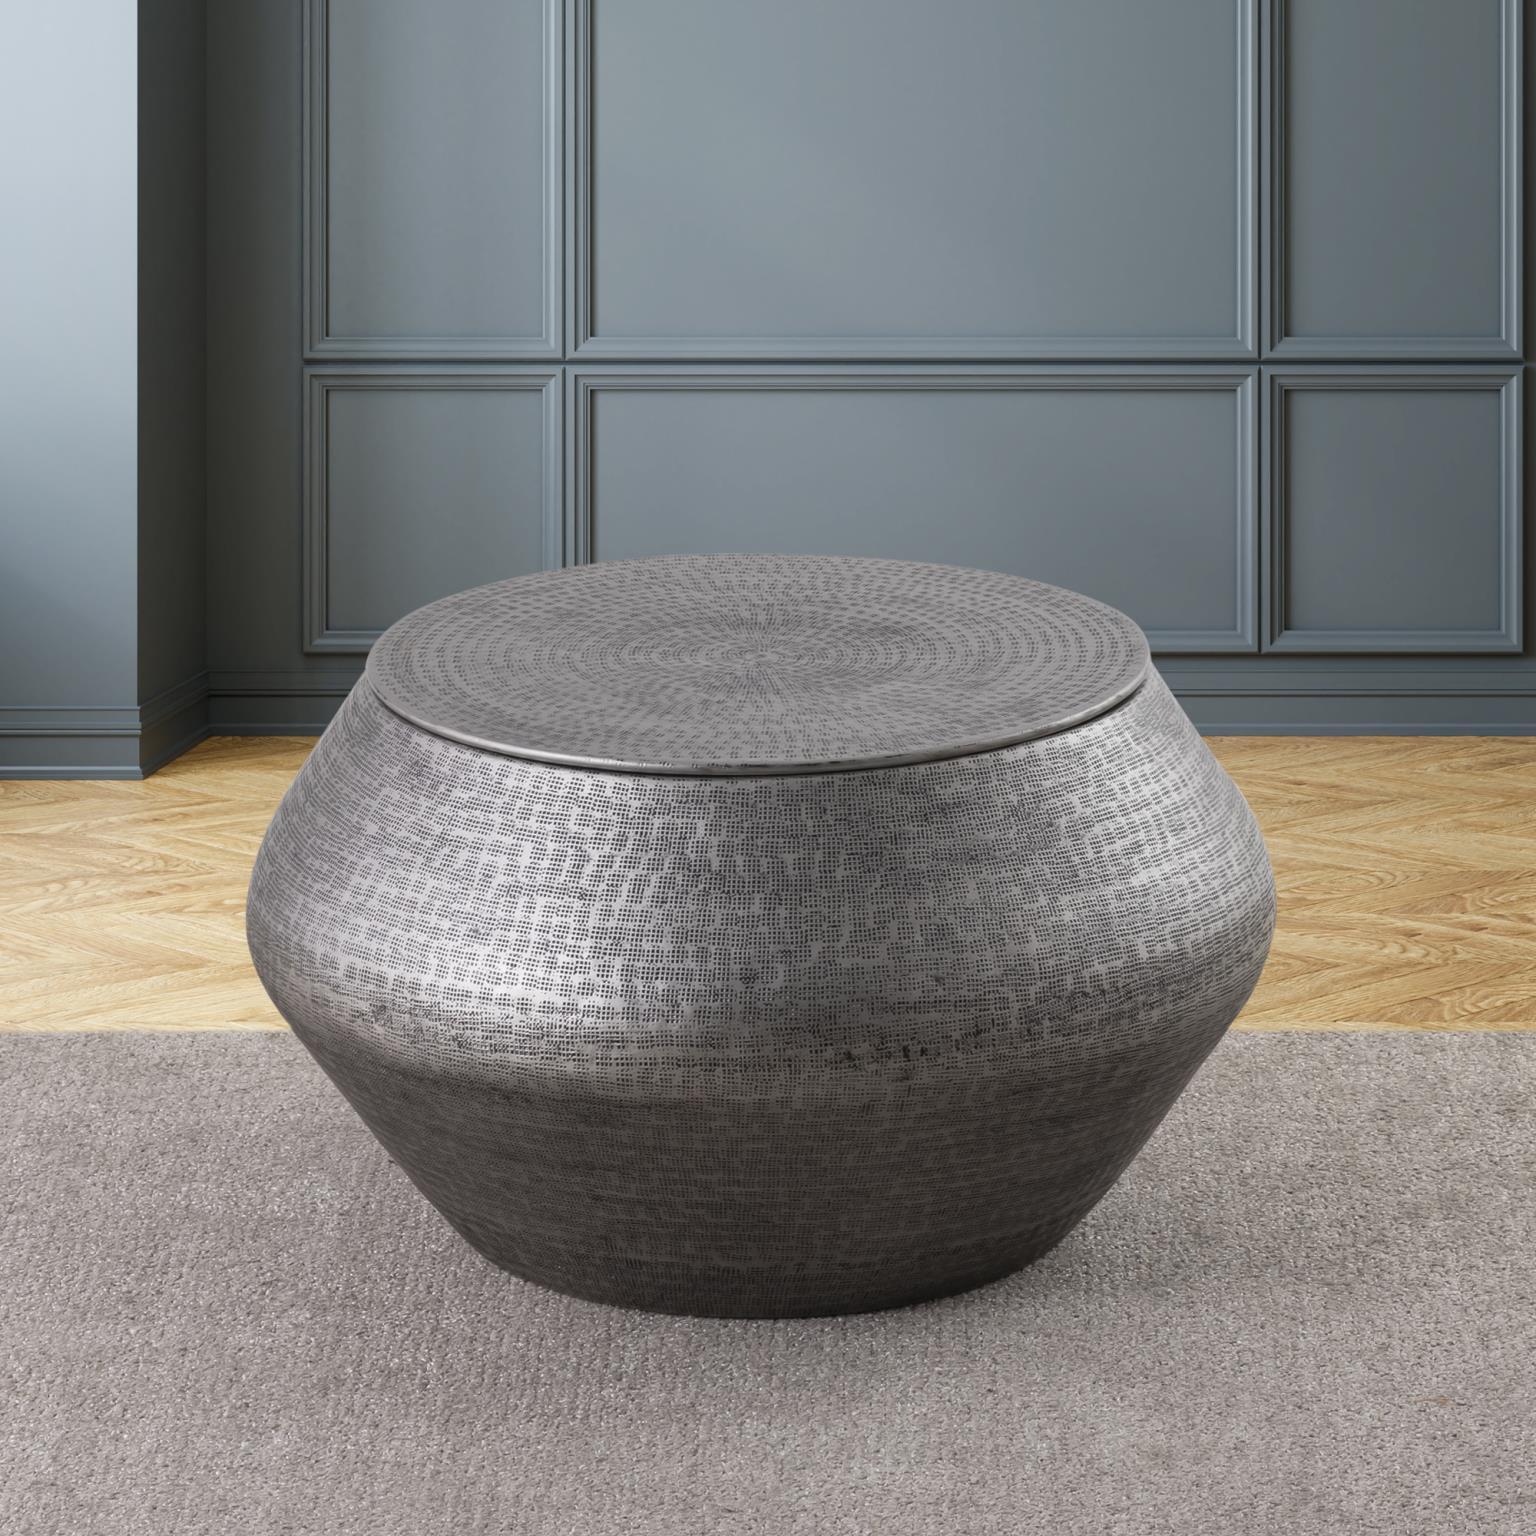 Contemporary, Modern Coffee Table T5203-29 Drum Coffee Table 718852652673 718852652673 in Gray 